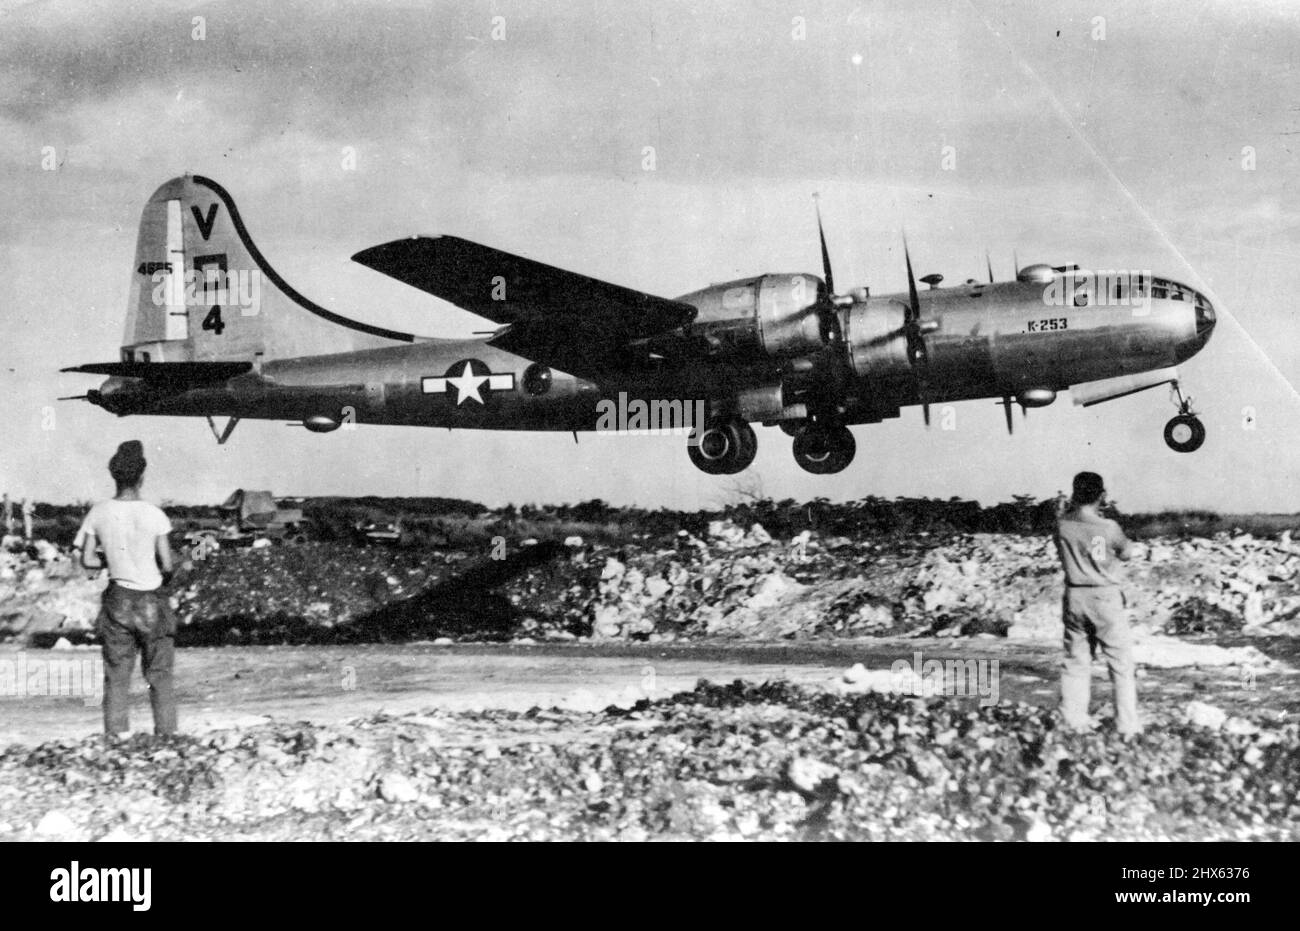 Taking Off For Tokyo A Tokyo-bound Superfortress takes off from a base in Saipan, central Pacific. December 21, 1944. (Photo by Planet). Stock Photo